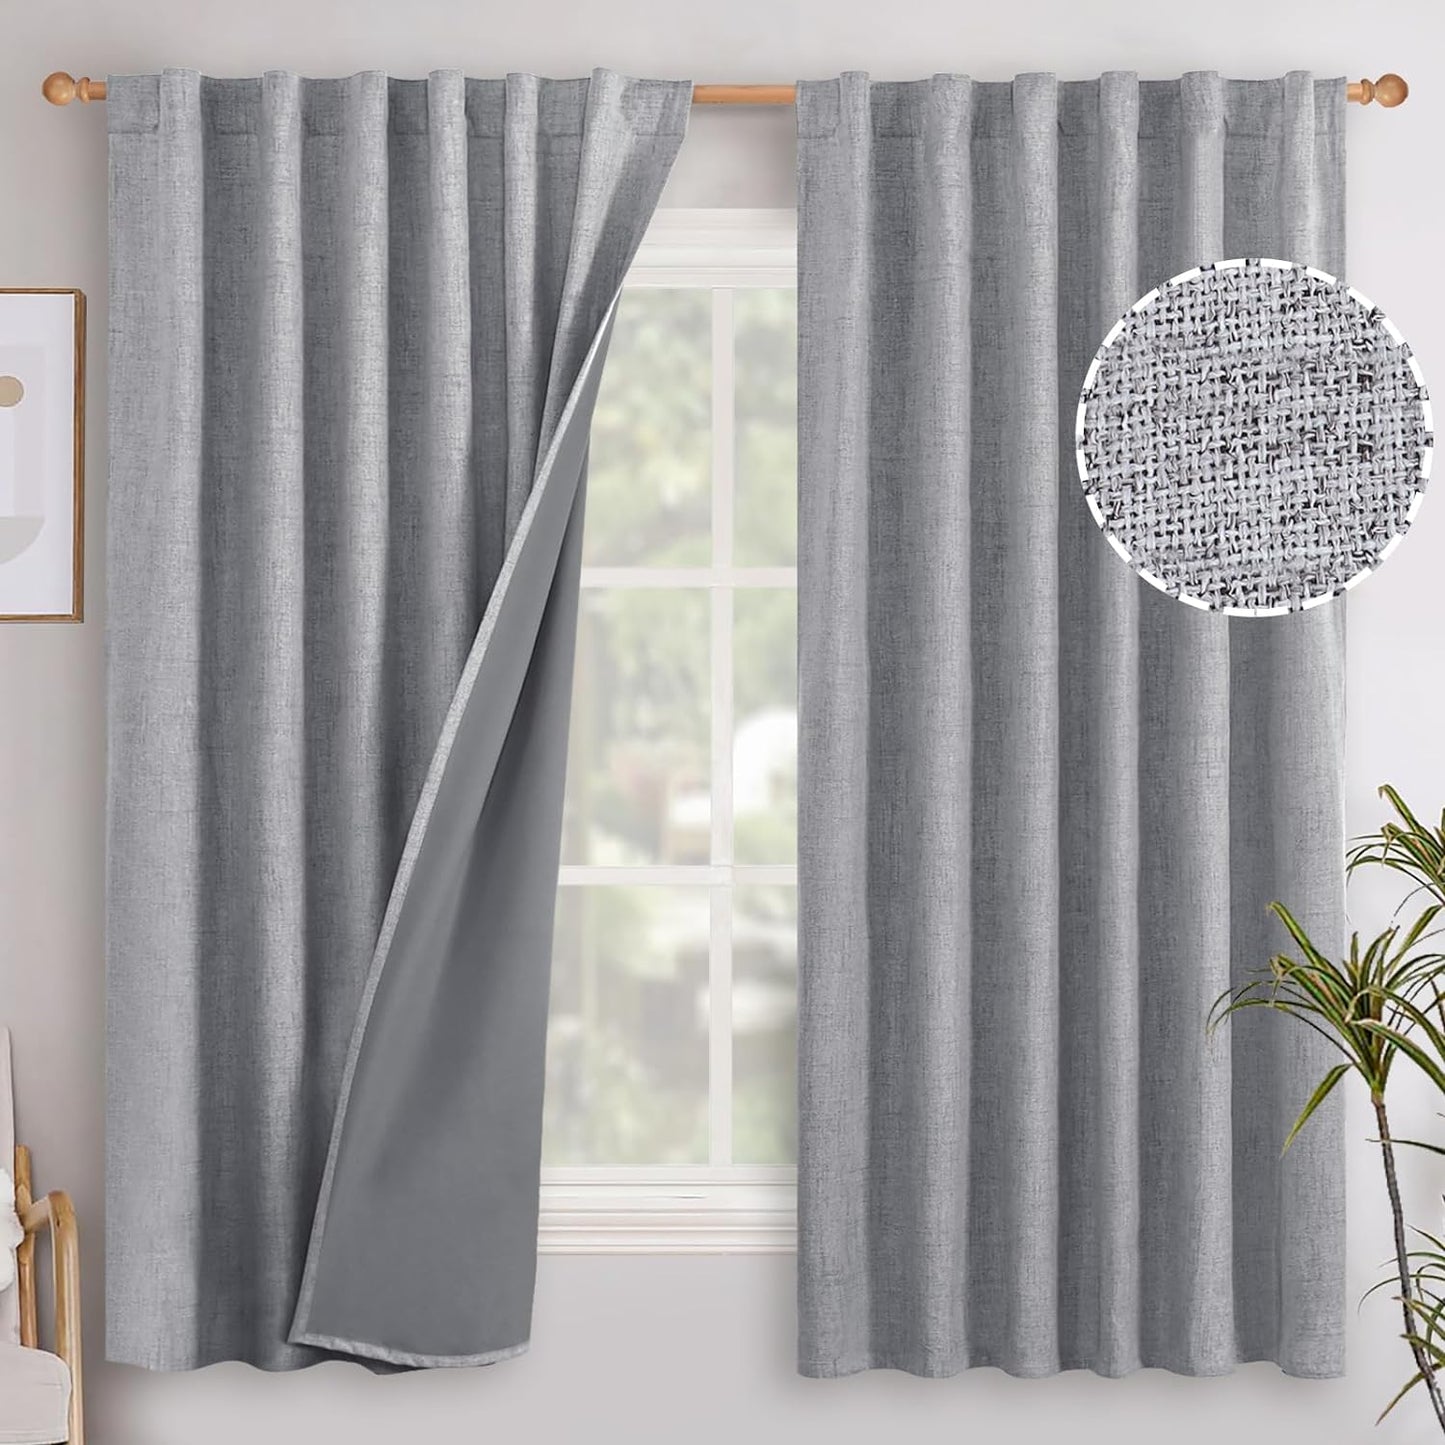 Youngstex Linen Blackout Curtains 63 Inch Length, Grommet Darkening Bedroom Curtains Burlap Linen Window Drapes Thermal Insulated for Basement Summer Heat, 2 Panels, 52 X 63 Inch, Beige  YoungsTex Back Tab/Grey 52W X 63L 